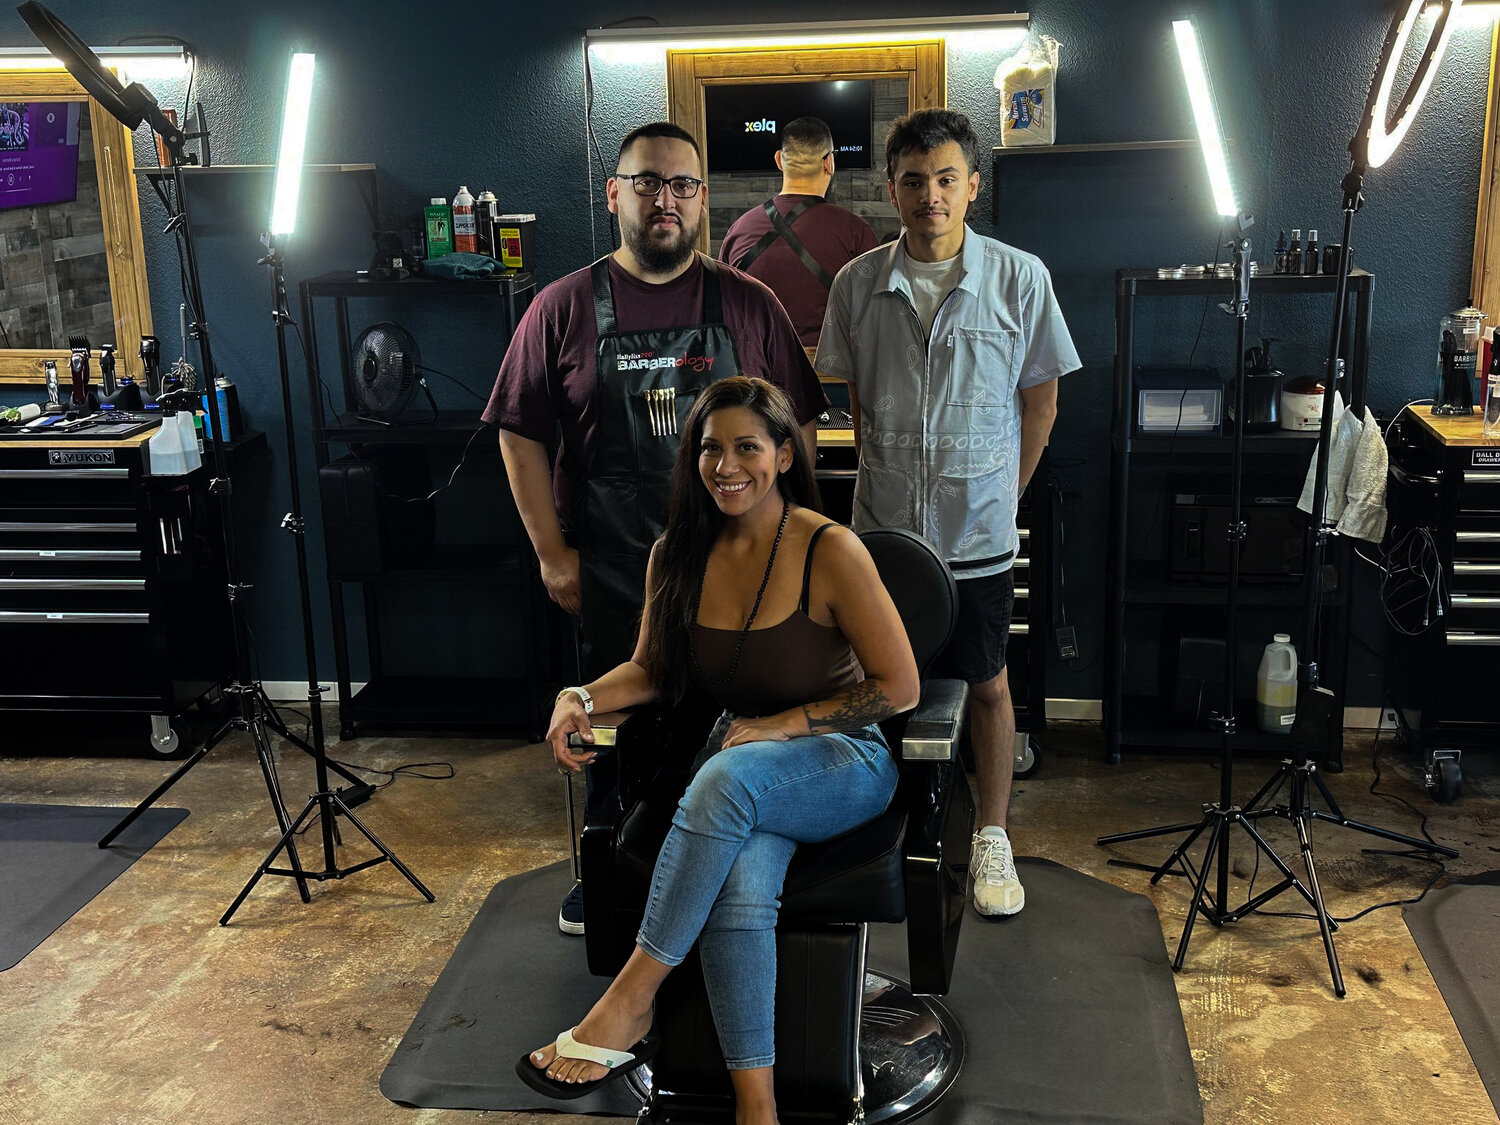 Jacob Dimond / Nisqually Valley News
Barbers Kali Tatu, front, Daniel Carrasco, back left, and Manny Diaz, back right, pose for a photo at Northwest Barber Lounge.